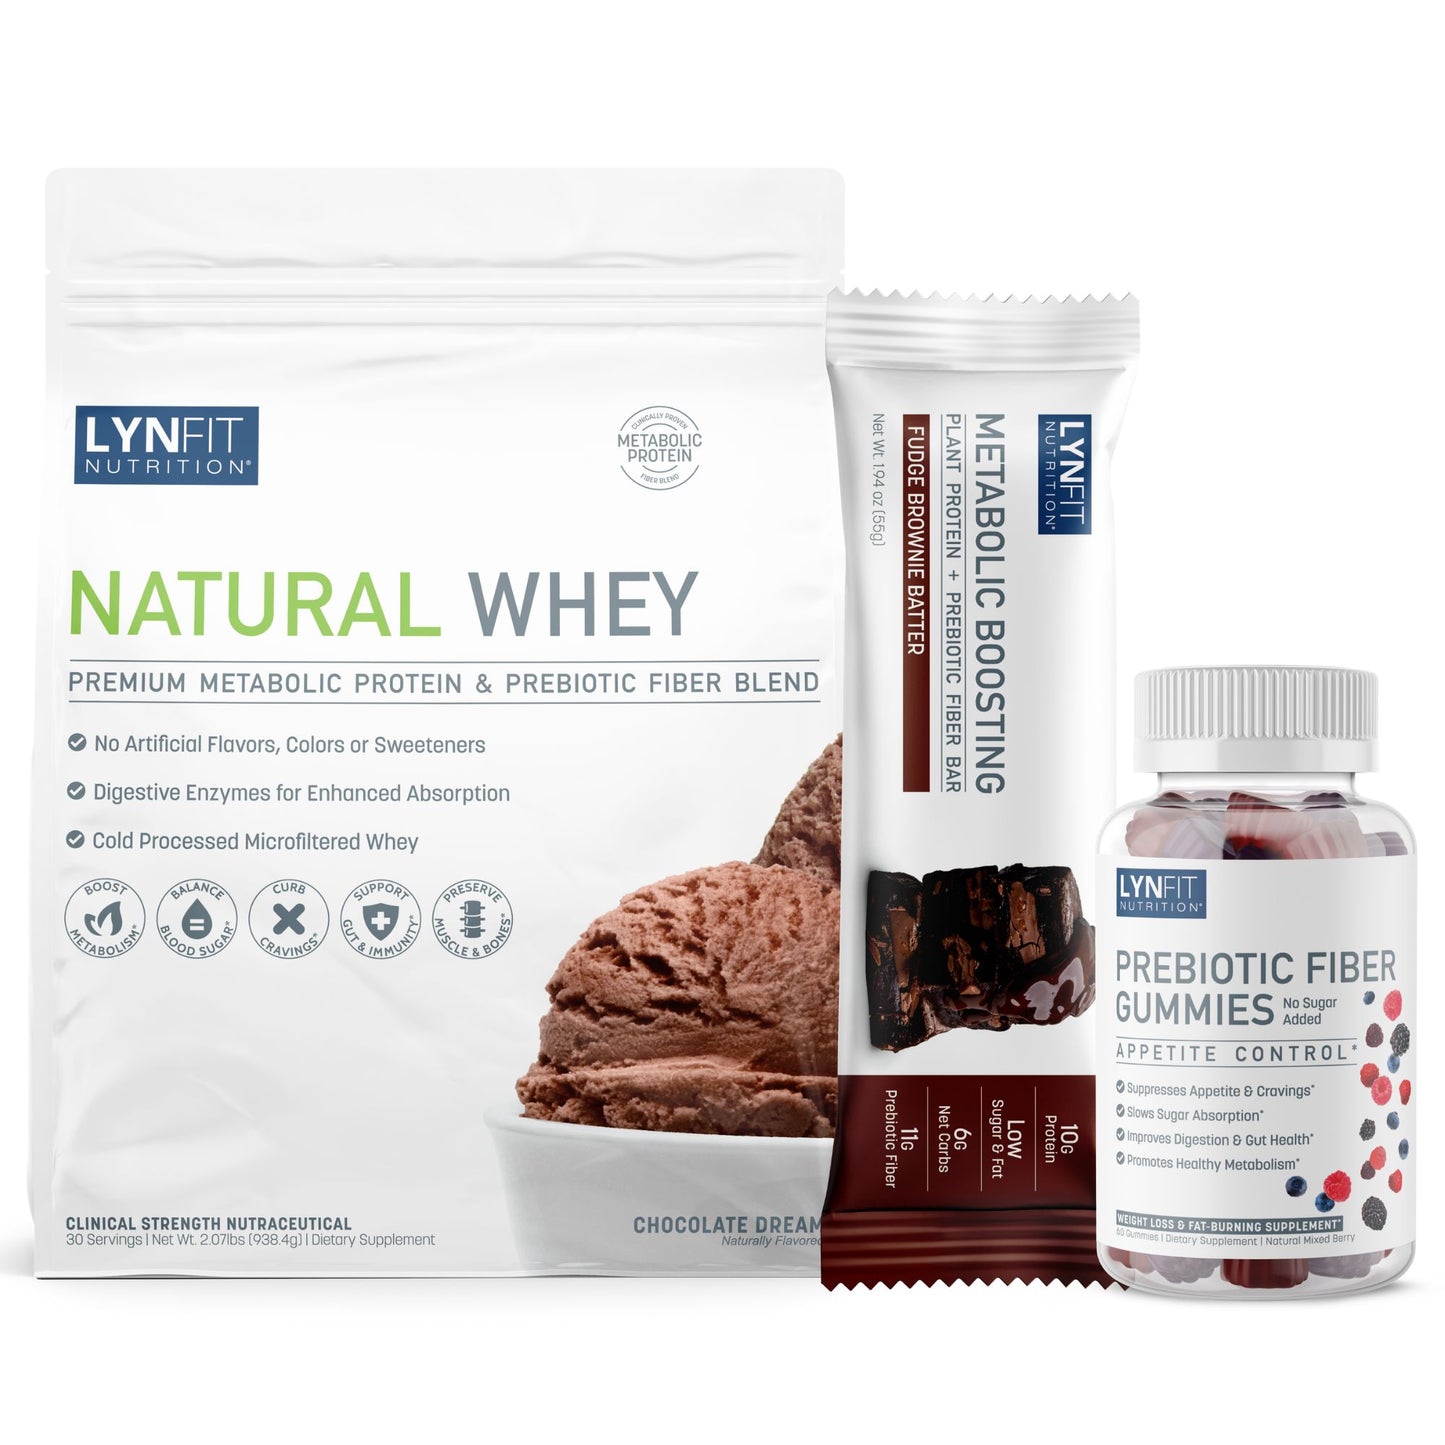 TV SPECIAL: Clean Keto Snack Stack | (1) Natural Whey Protein Powder (1) Prebiotic Fiber Gummies (12) Plant-Based Lean Bars